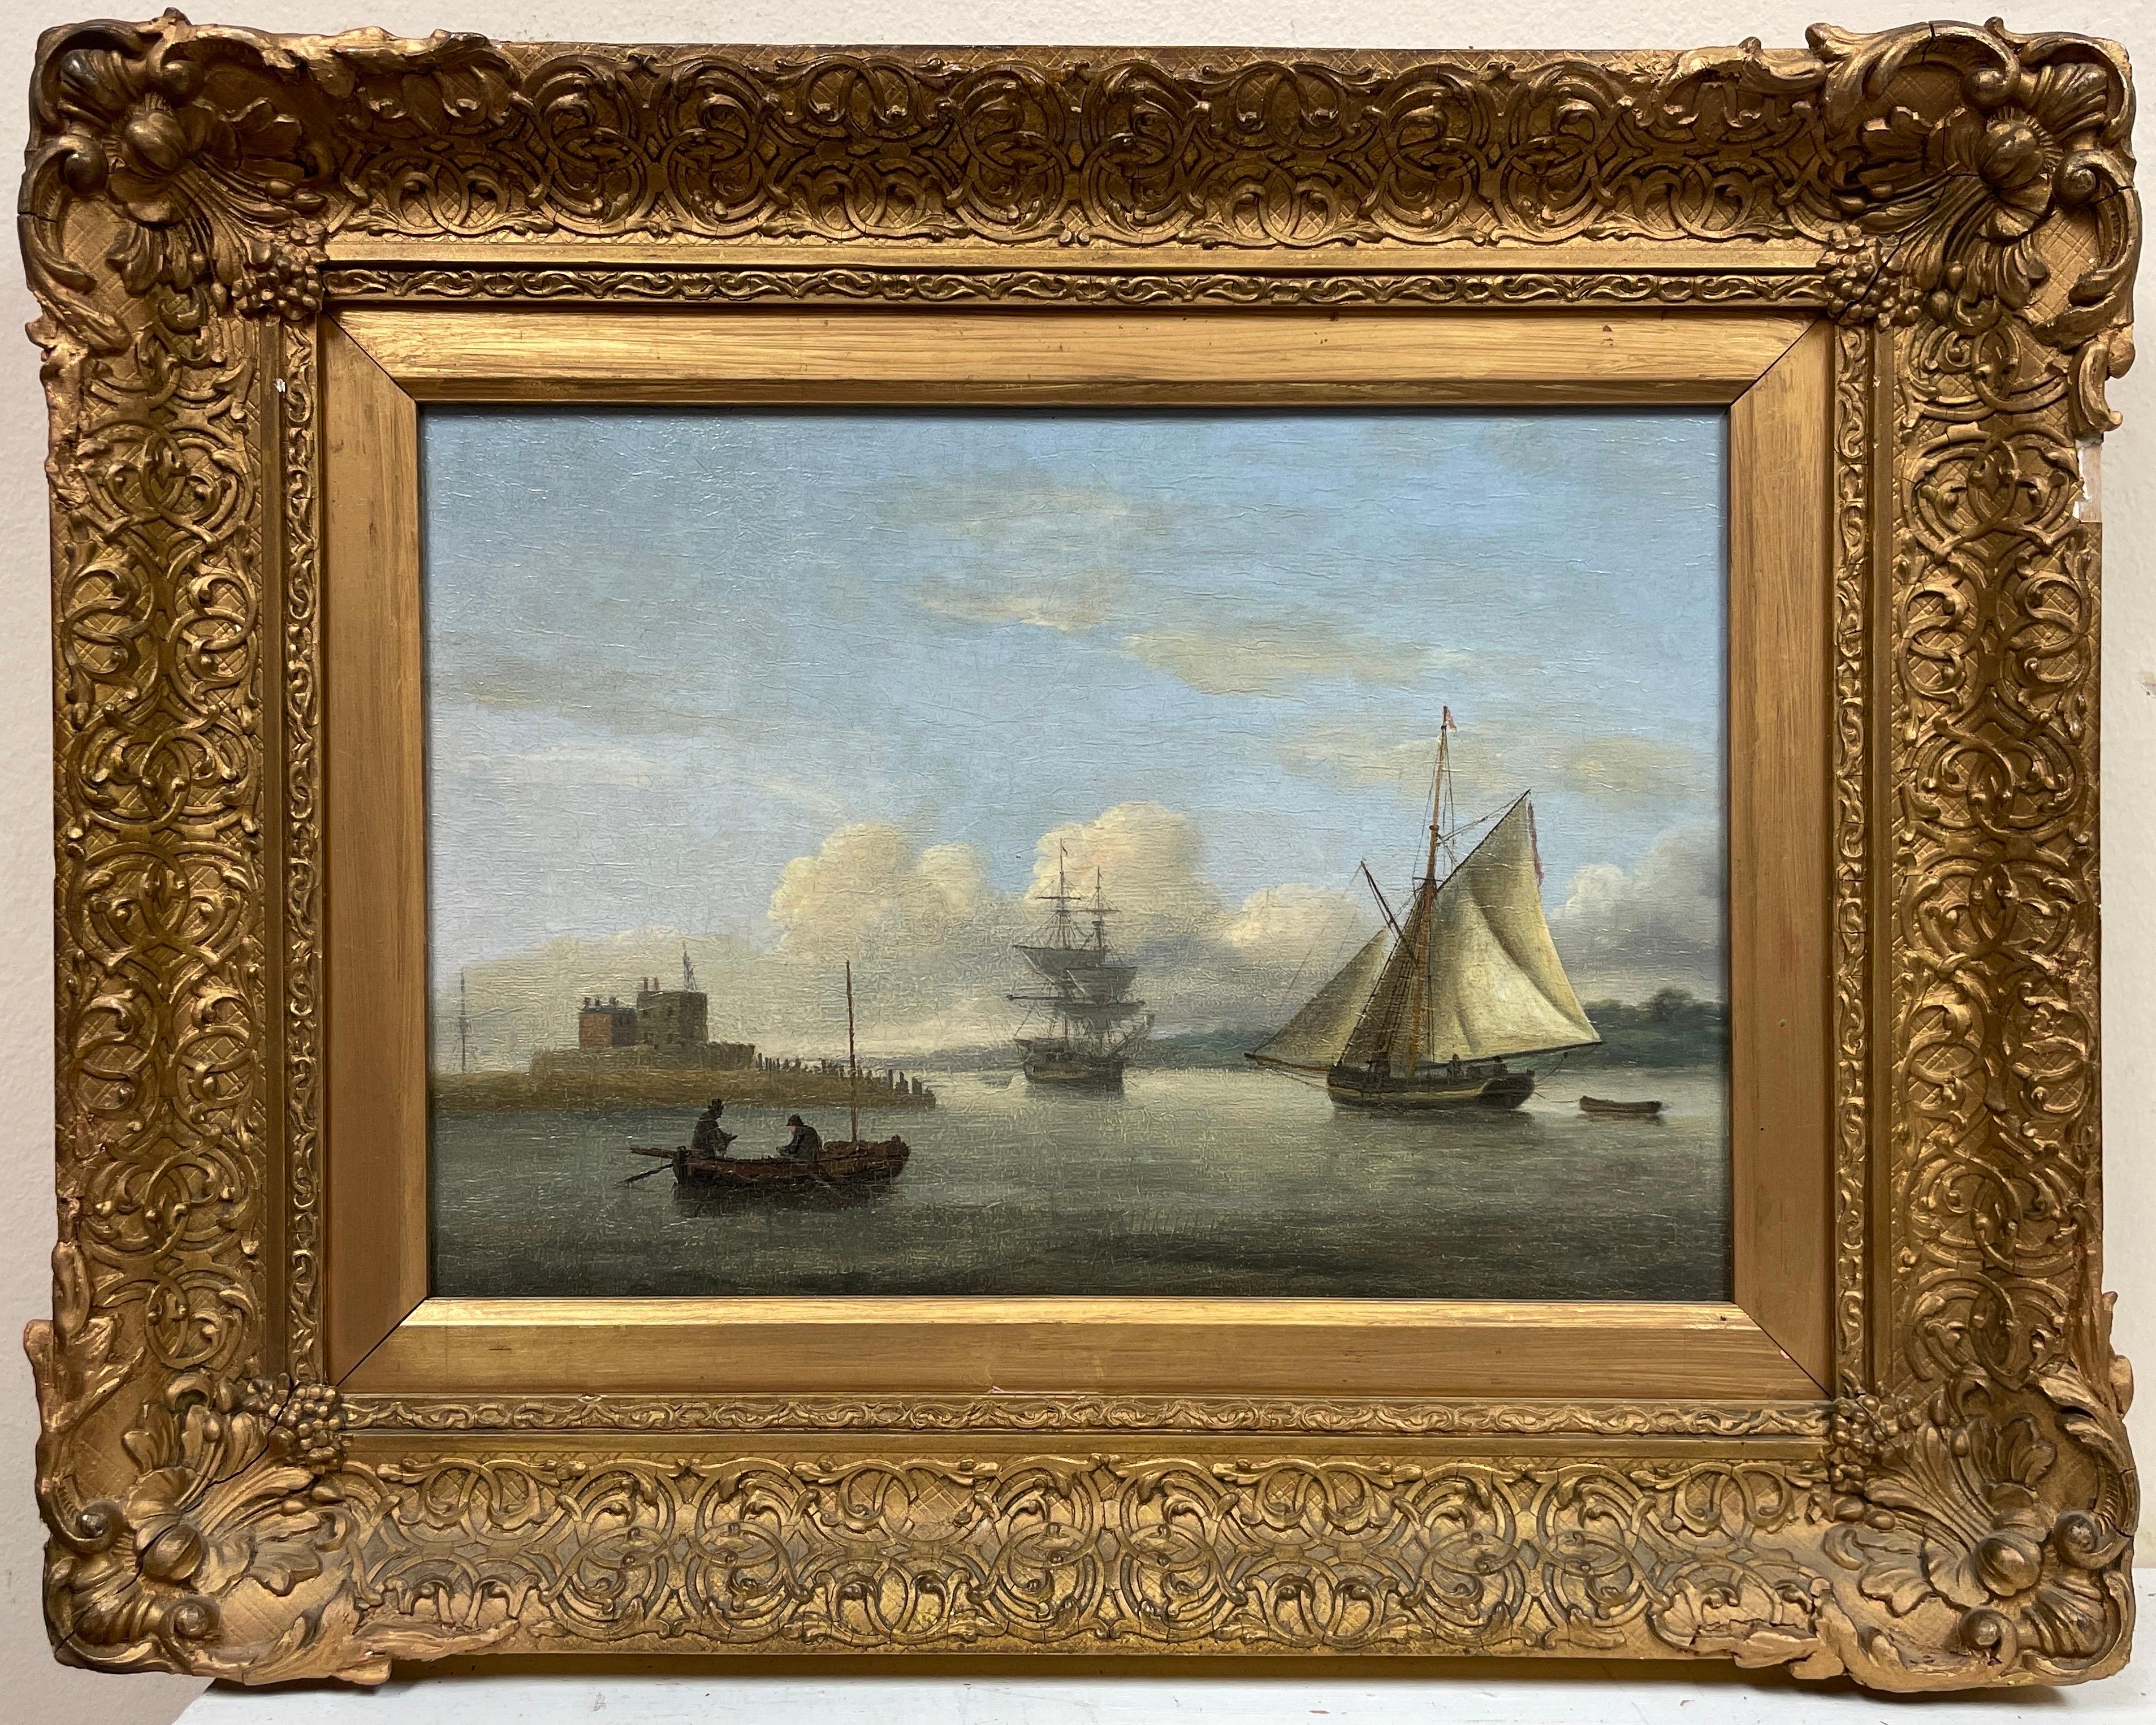 Dutch 18th century Figurative Painting - 18th Century Dutch Marine Oil Painting on Panel Shipping in Calm Estuary